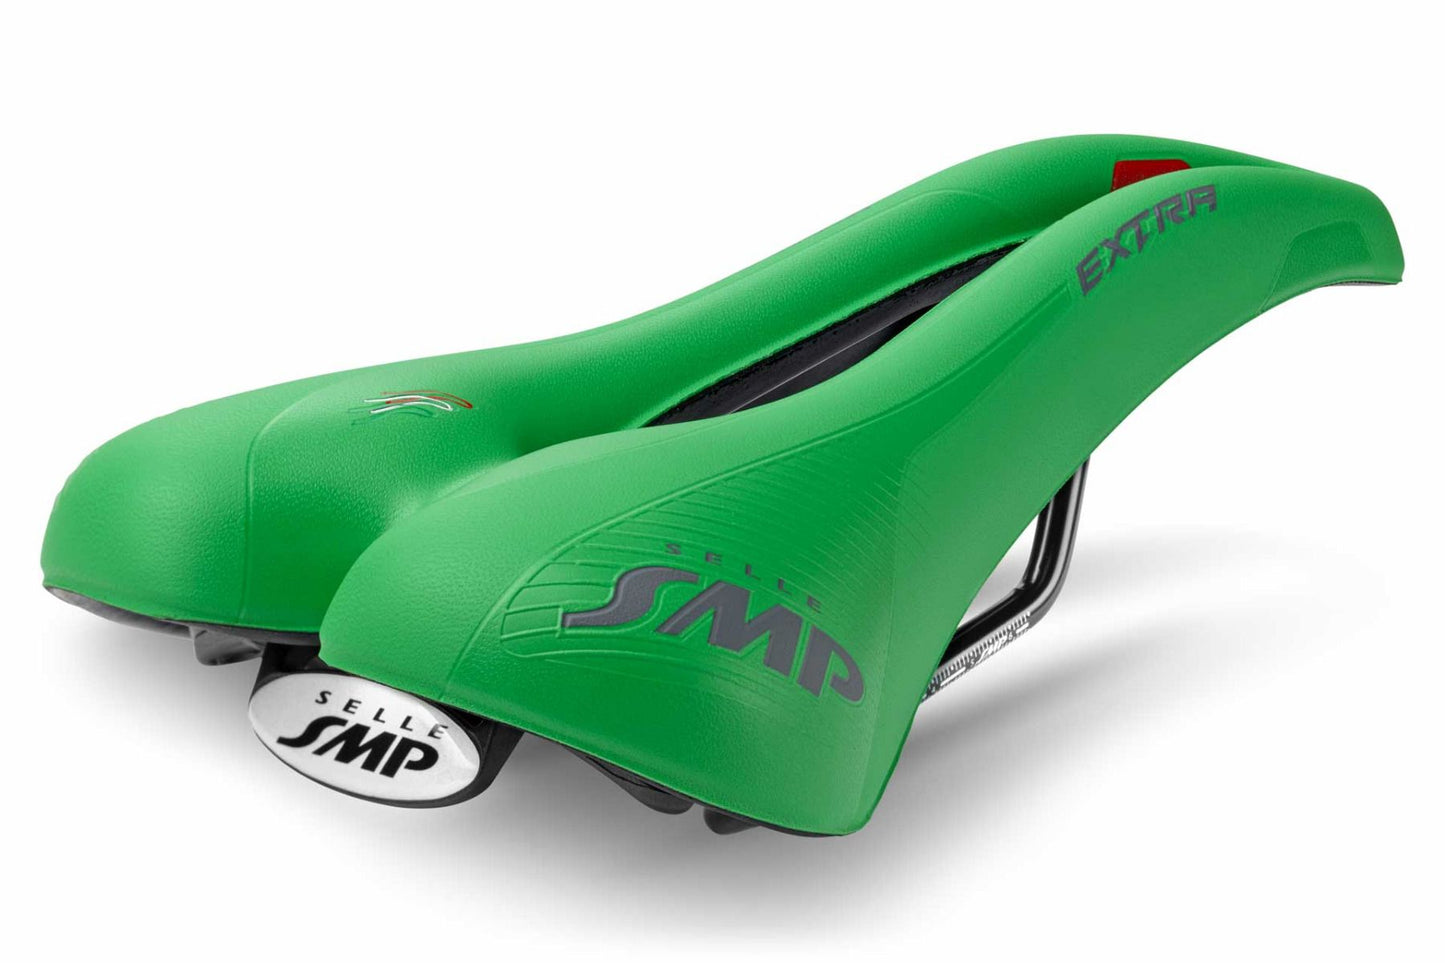 Selle SMP Extra Saddle (Green)